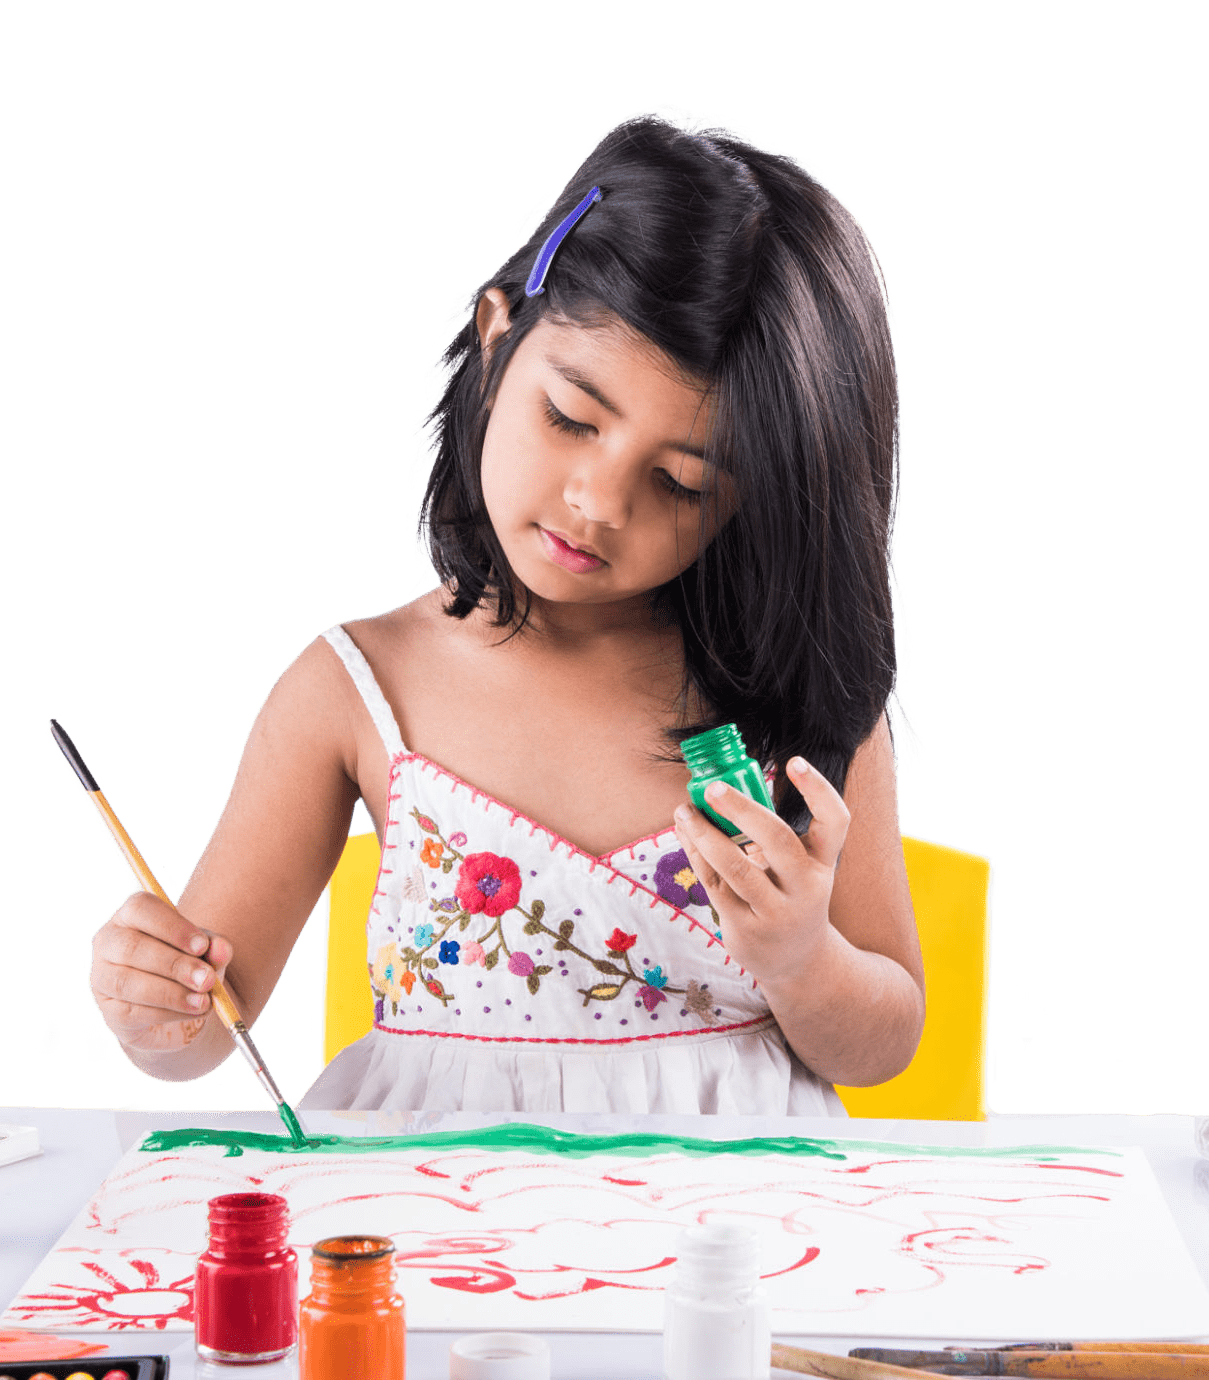 The Online Art Classes I've Been Taking Myself and with My Kids